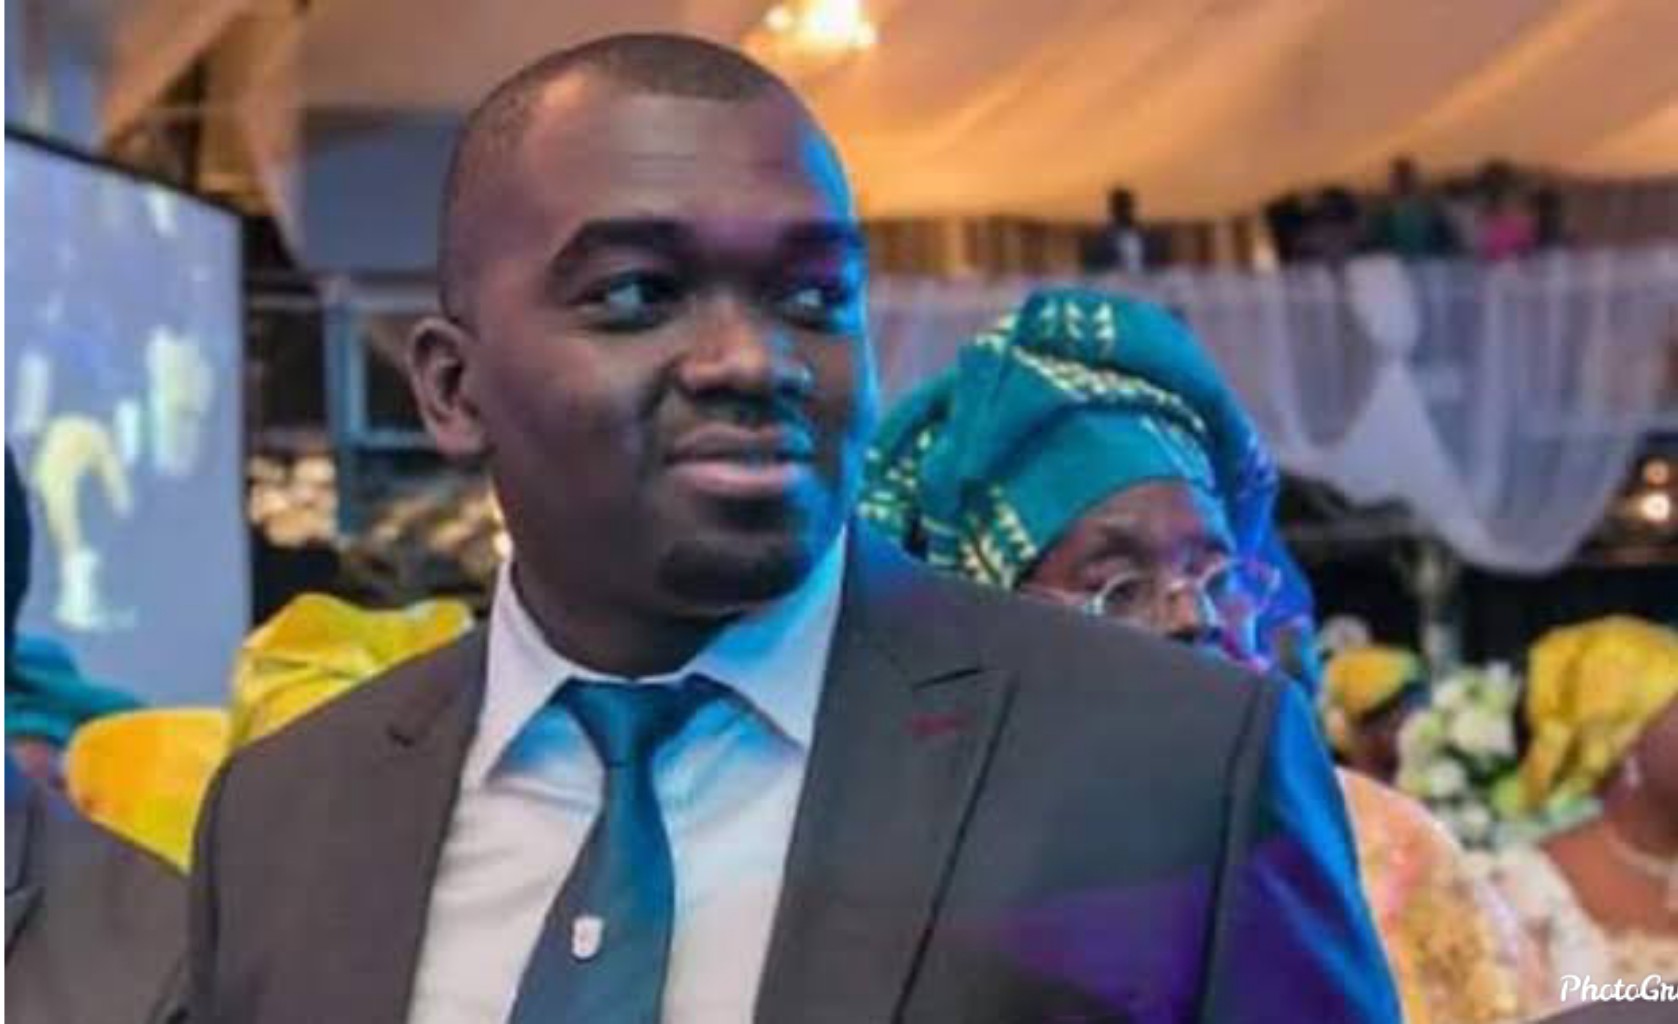 Governor Obaseki Appoints Uzamere As New Chief Of Staff After Akerele’s Resignation